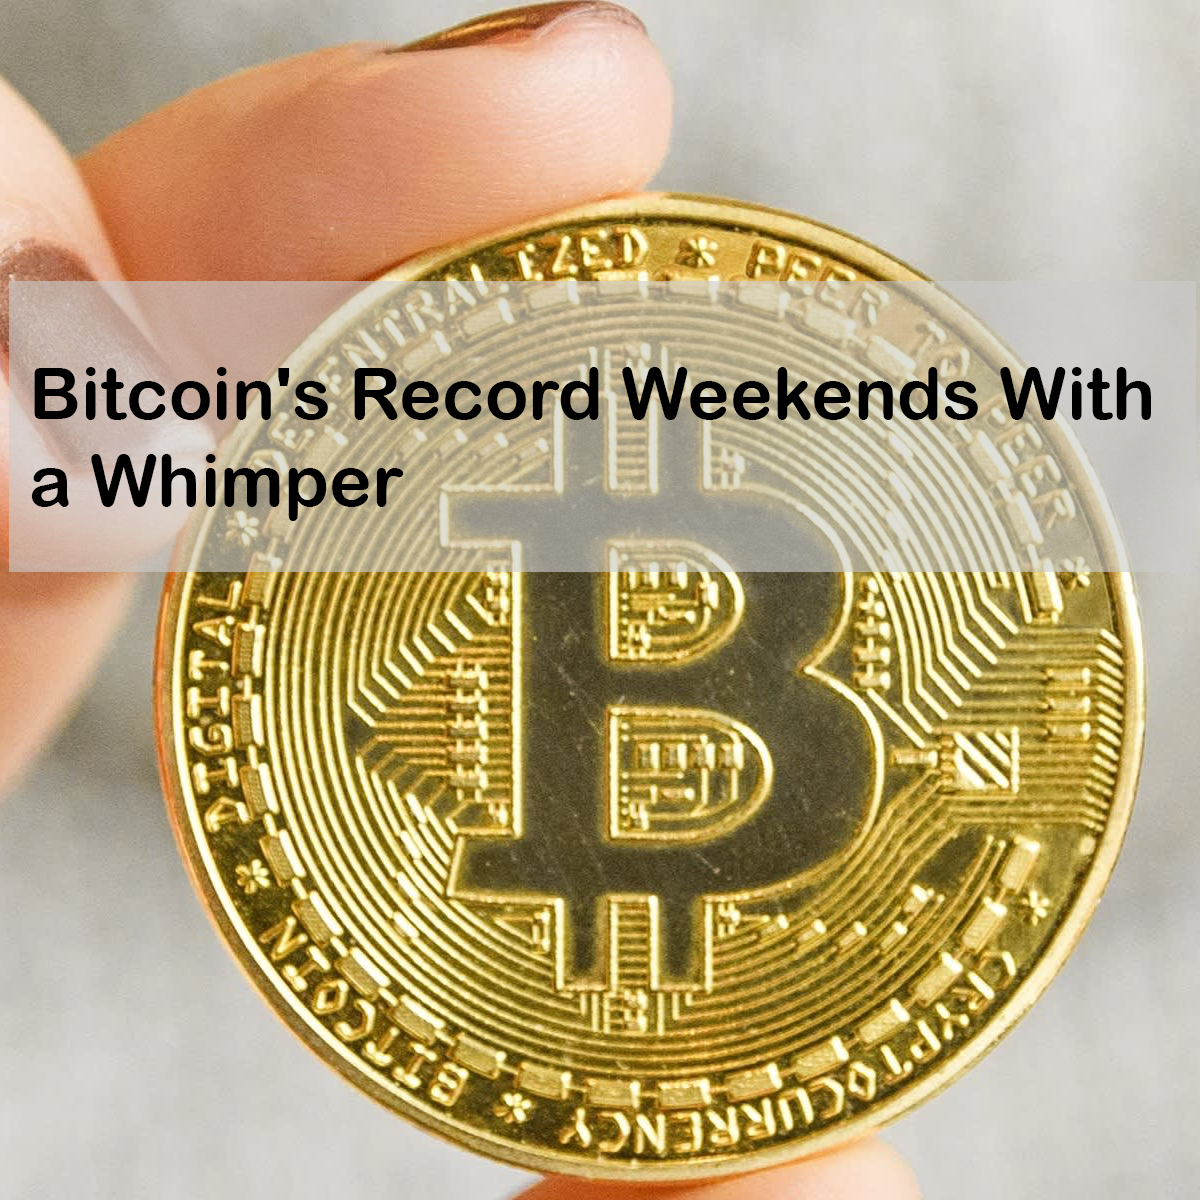 Bitcoin's Record Weekends With a Whimper